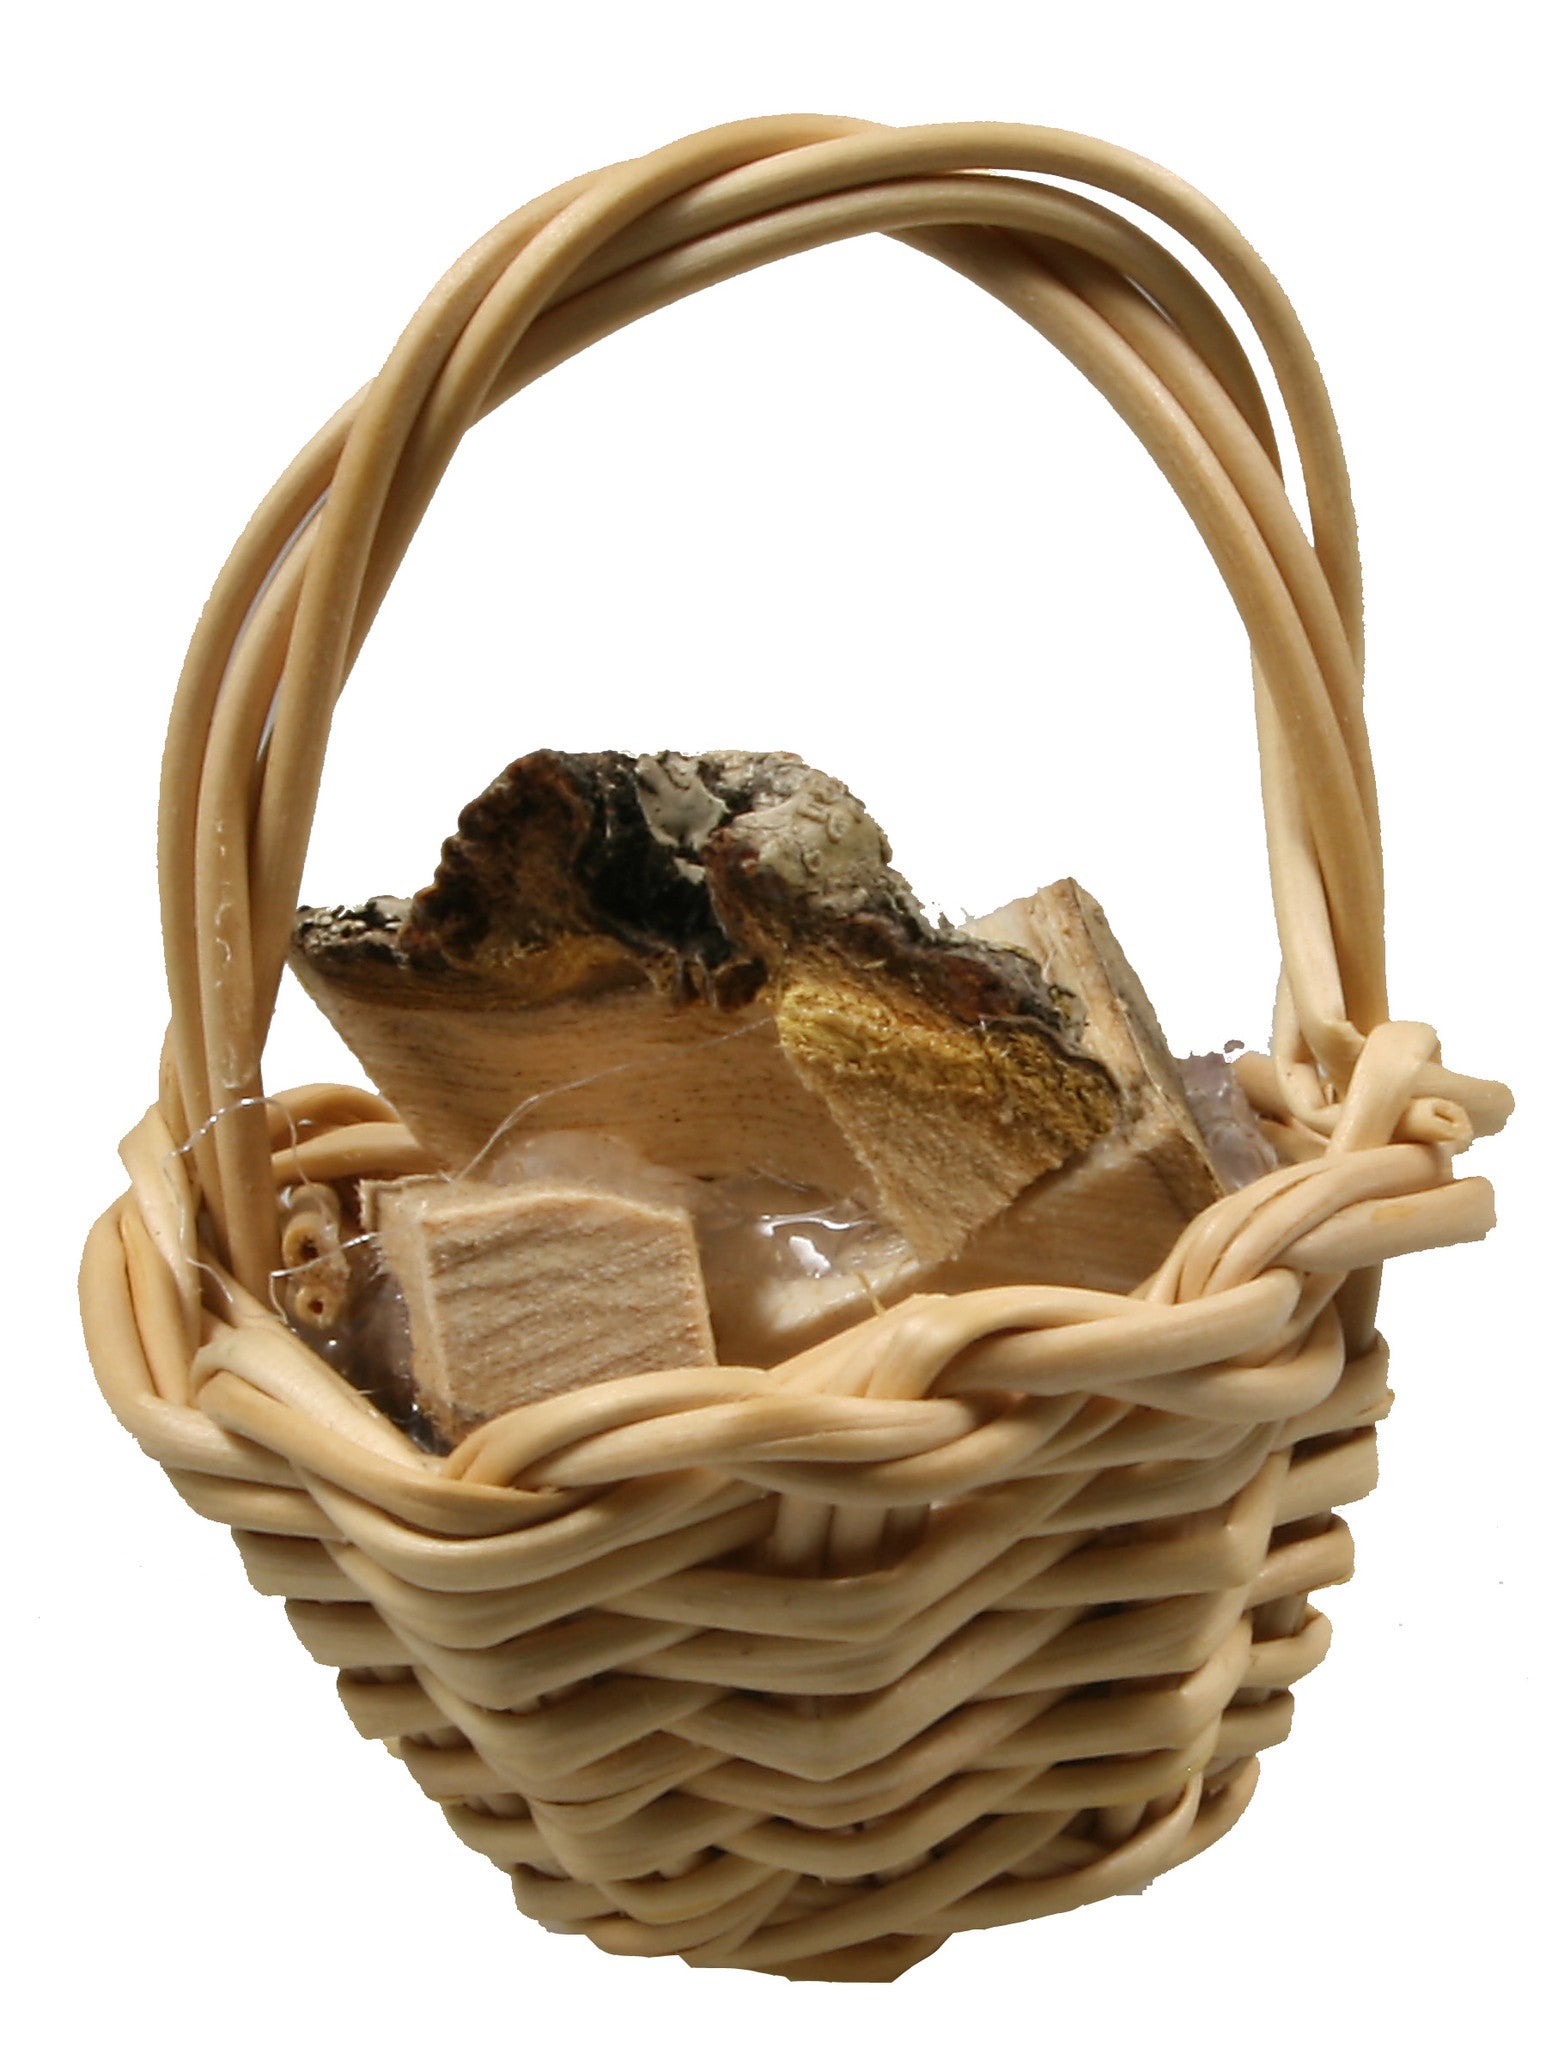 Basket, Gathering with Wood - 1" tall